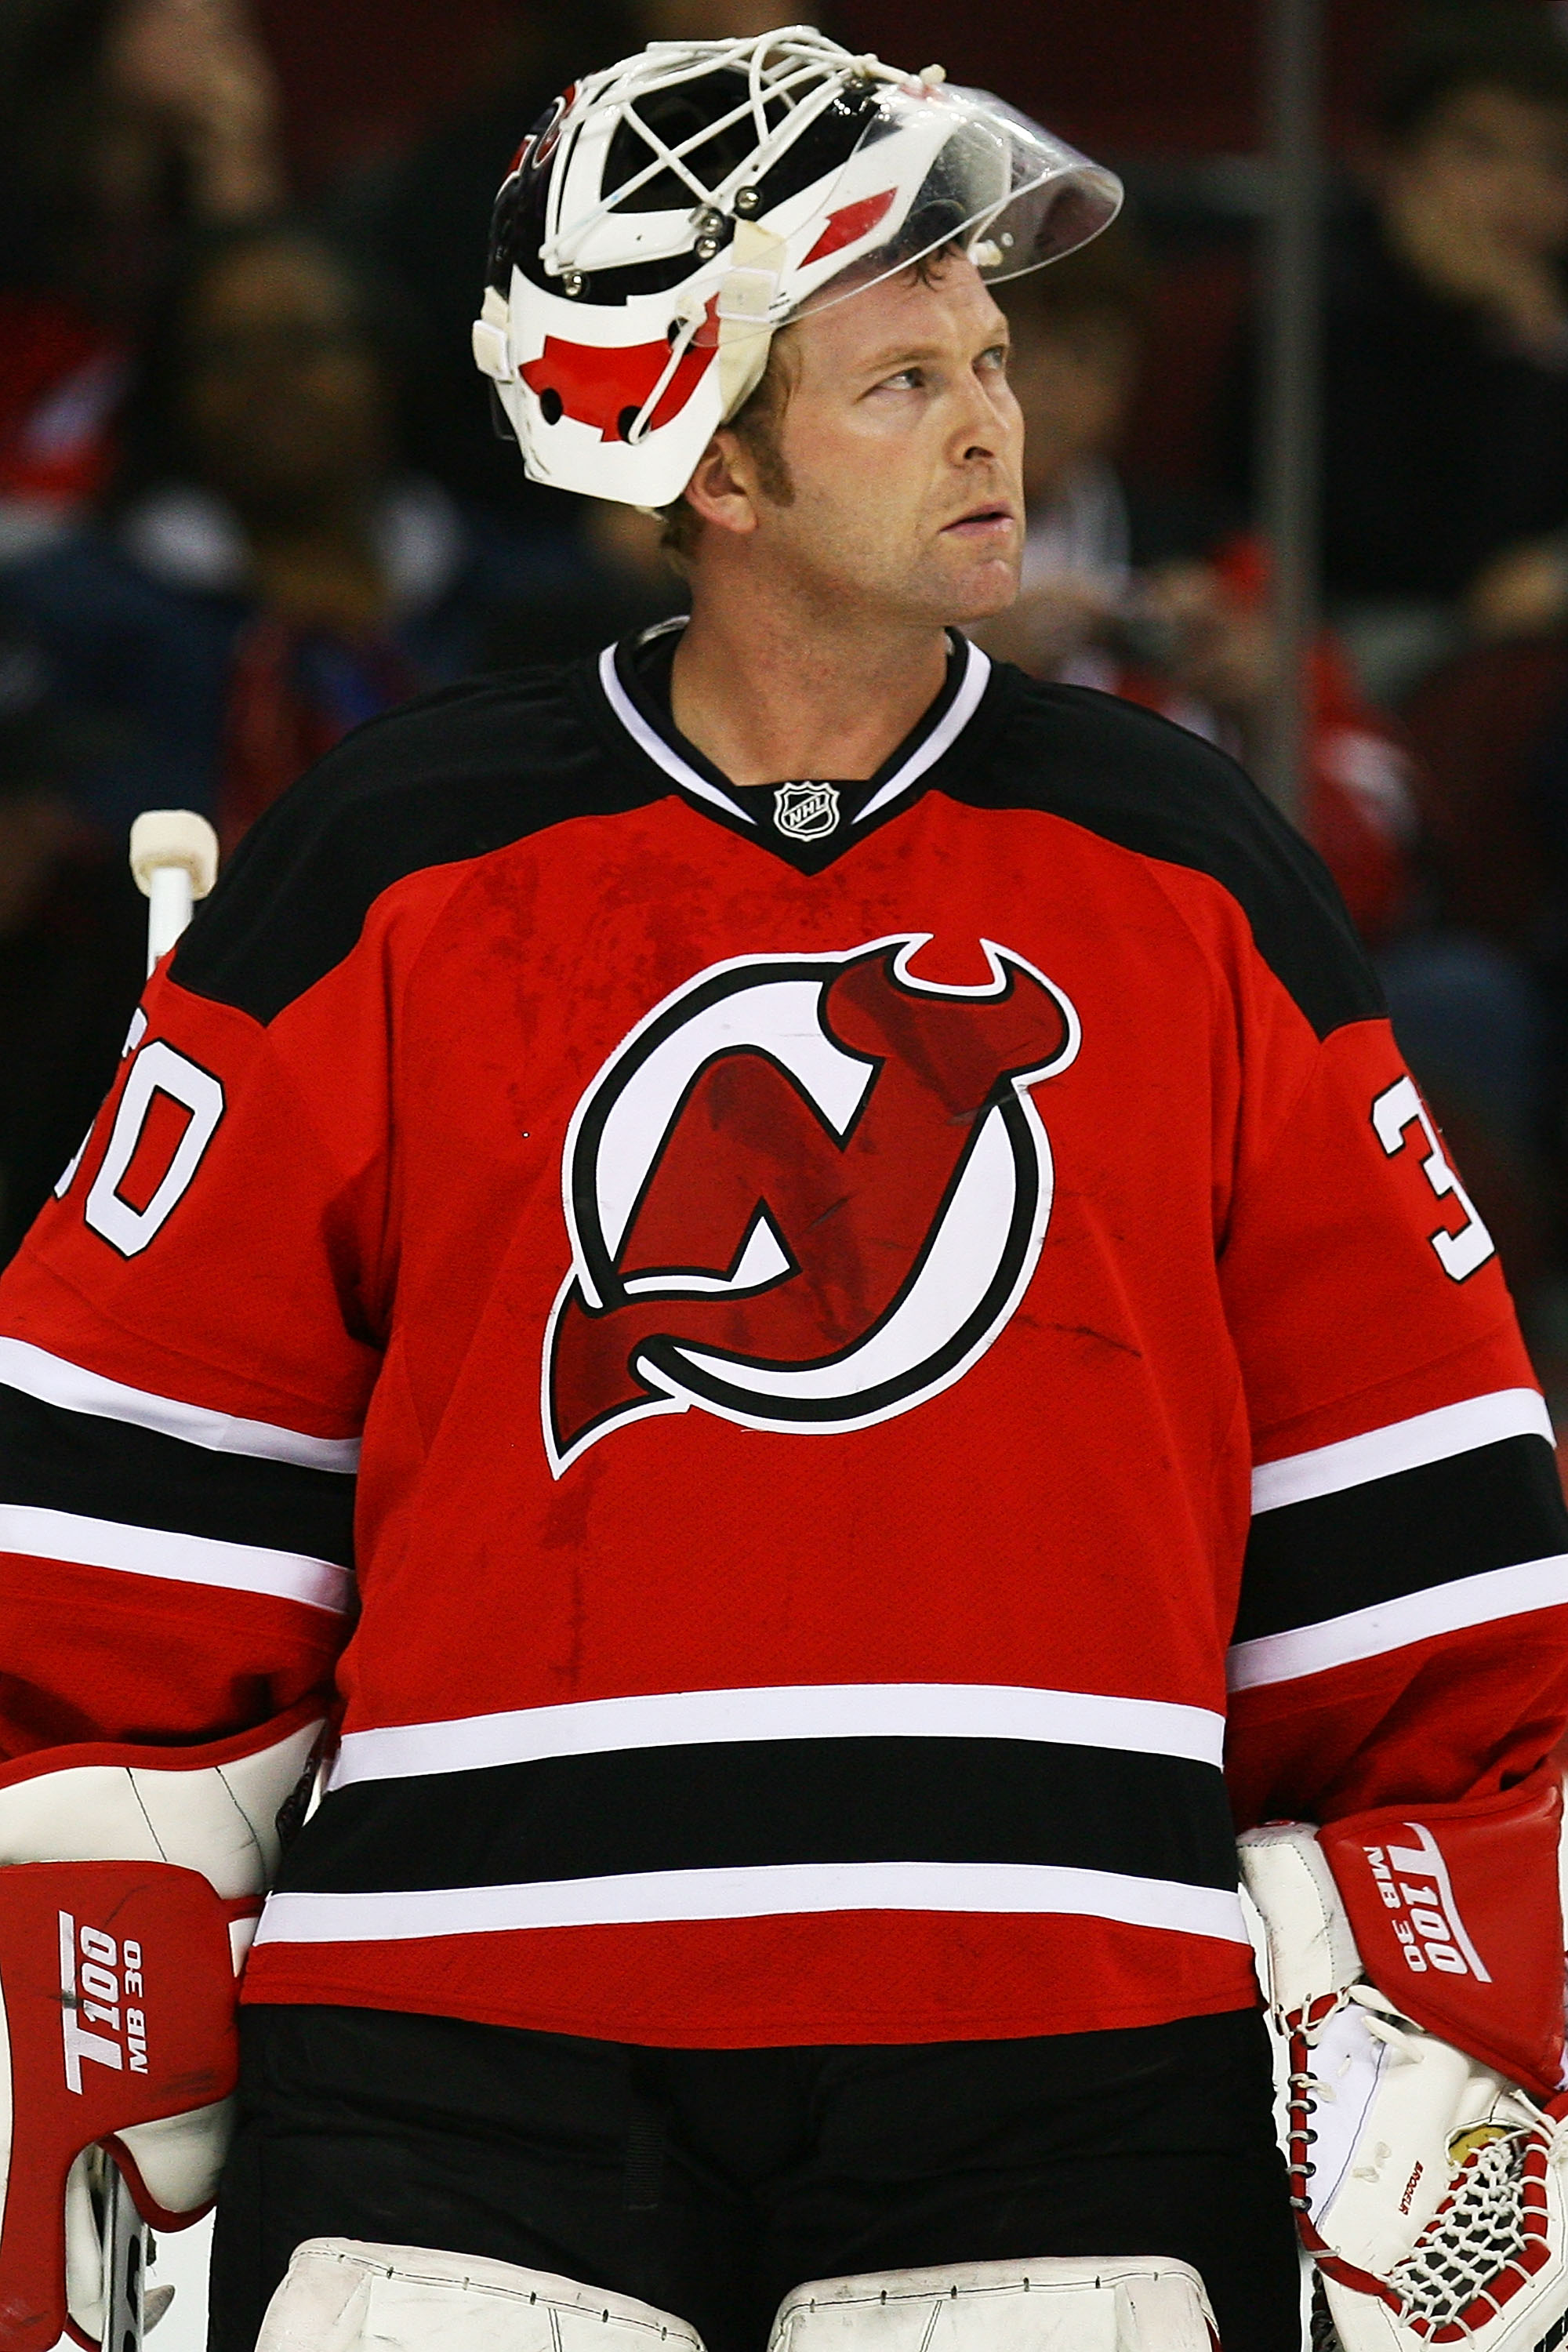 Are the Devils already forced to start thinking about next year?